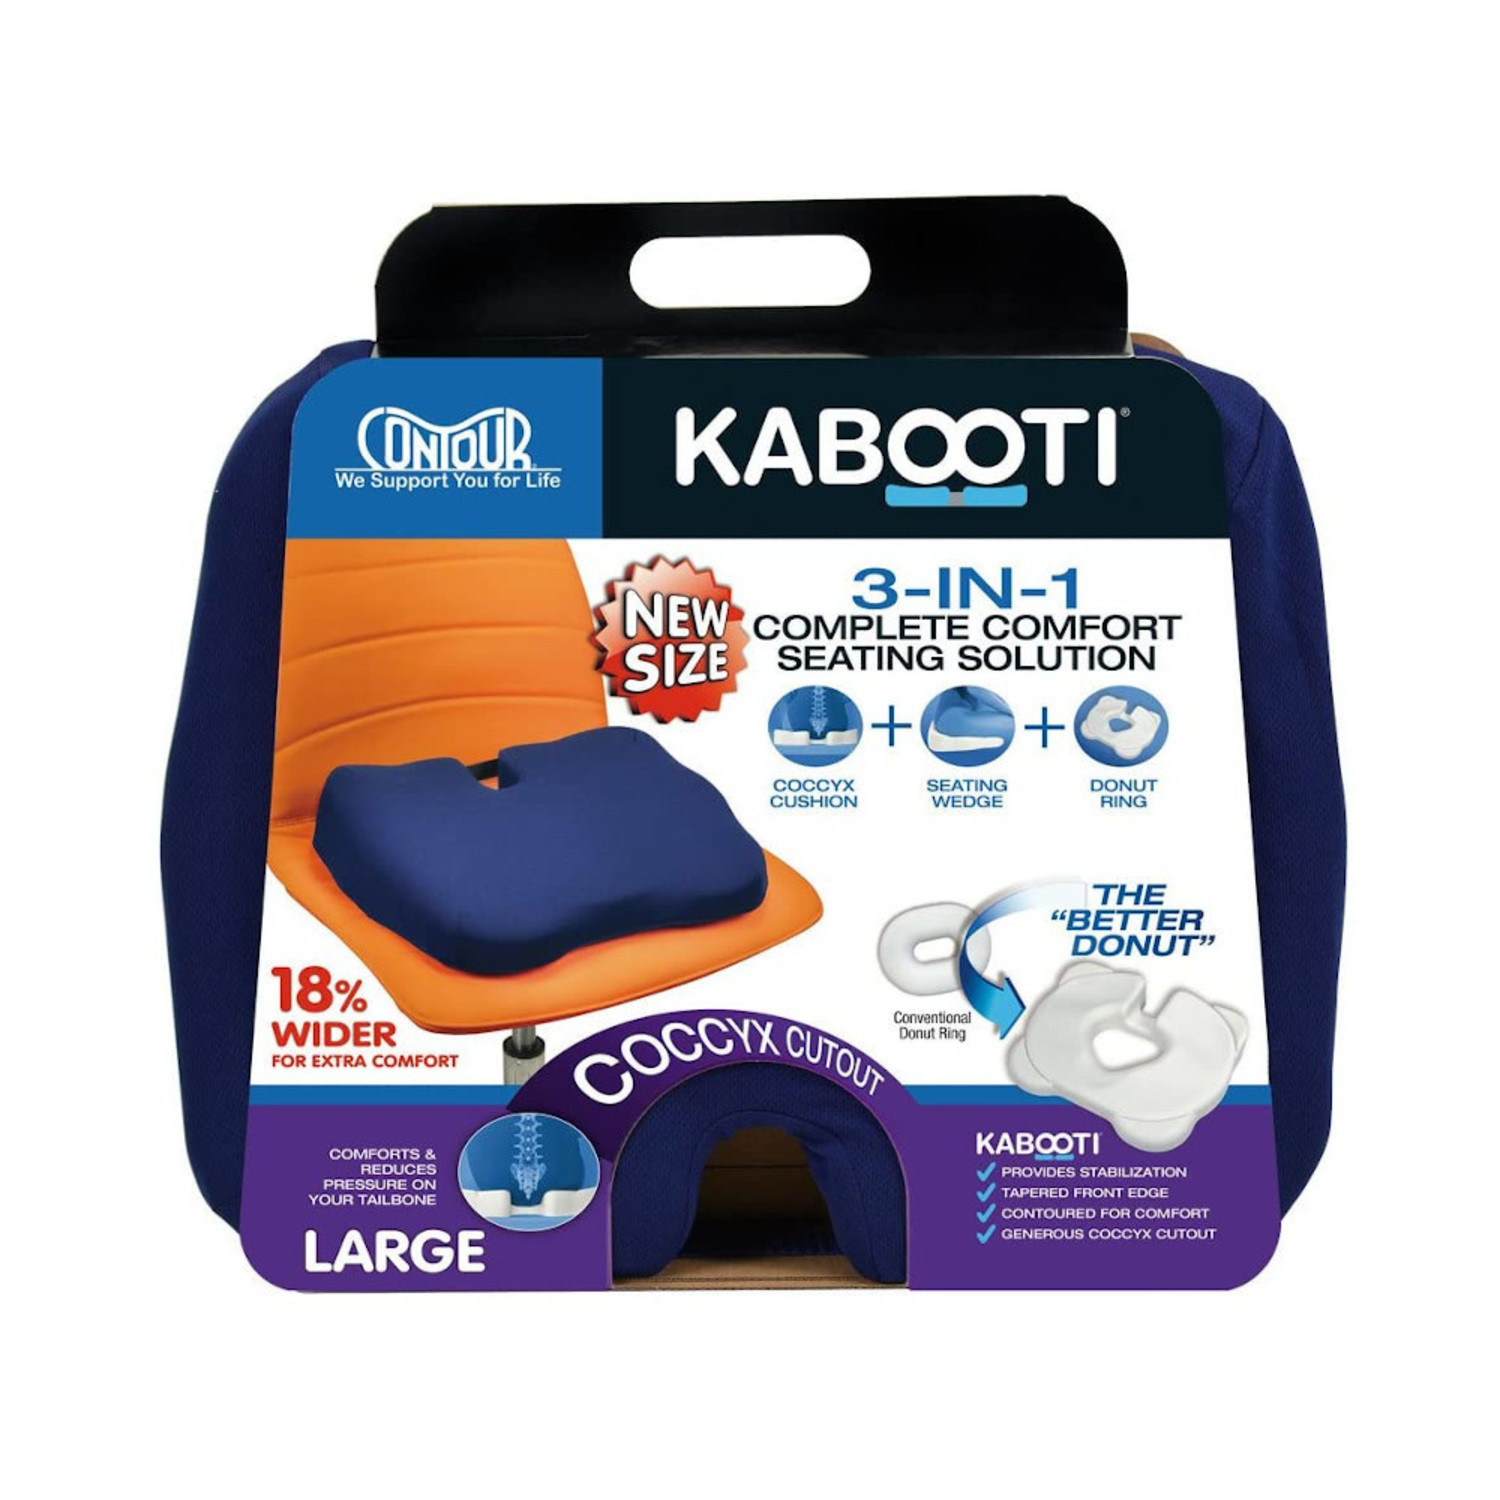 NEW KABOOTI ICE PAIN RELIEF SEAT CUSHION w/REMOVABLE COOL GEL